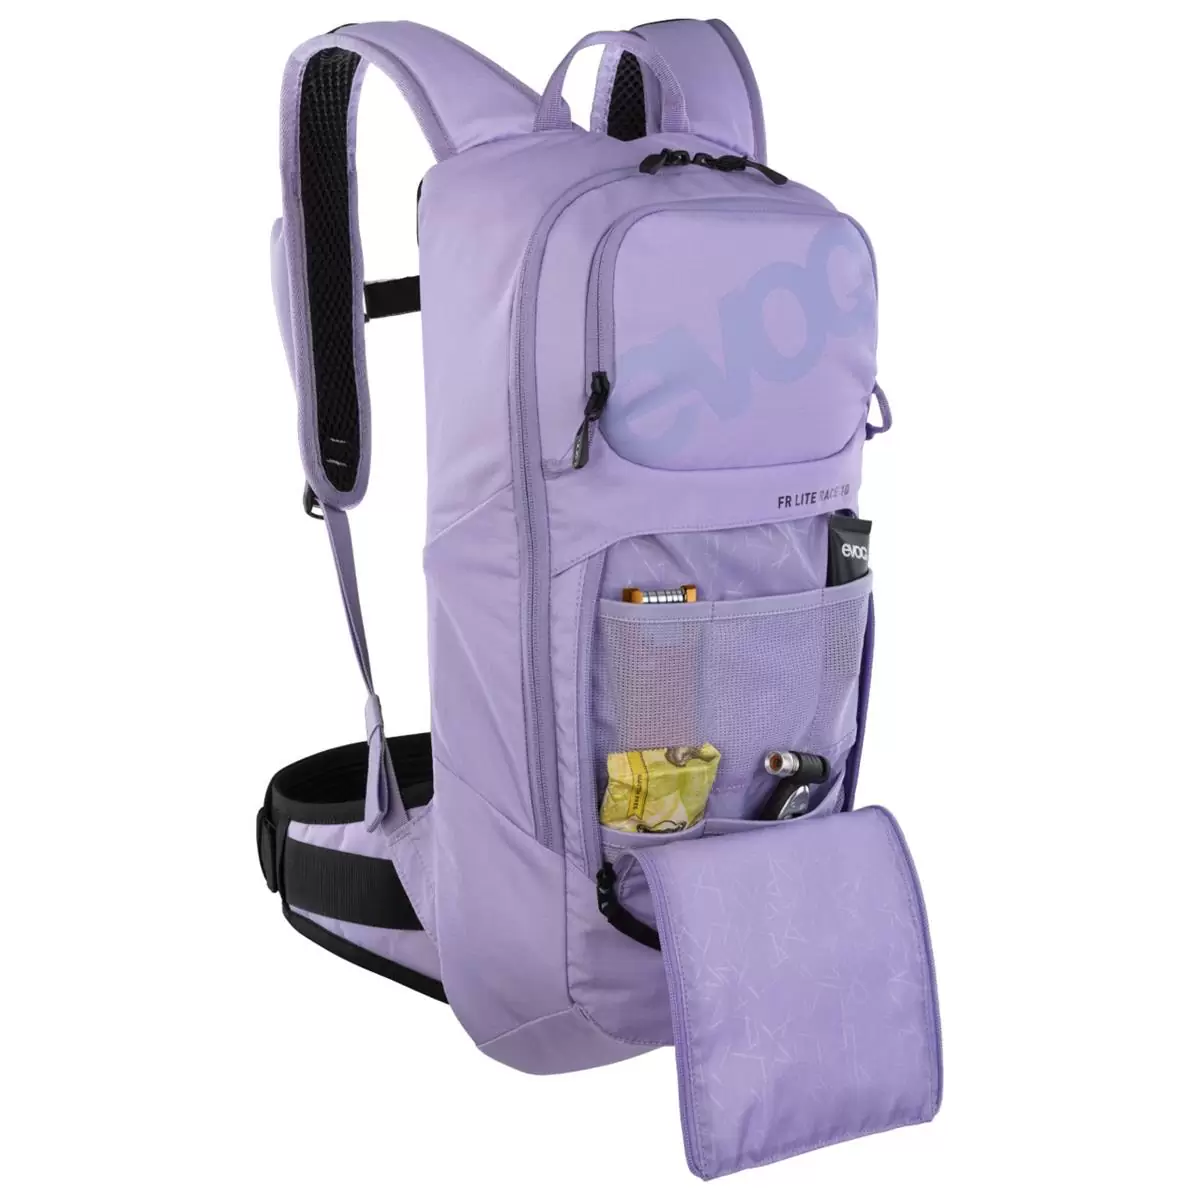 FR LITE RACE 10 Backpack With Back Protector 10L Purple Size S #2